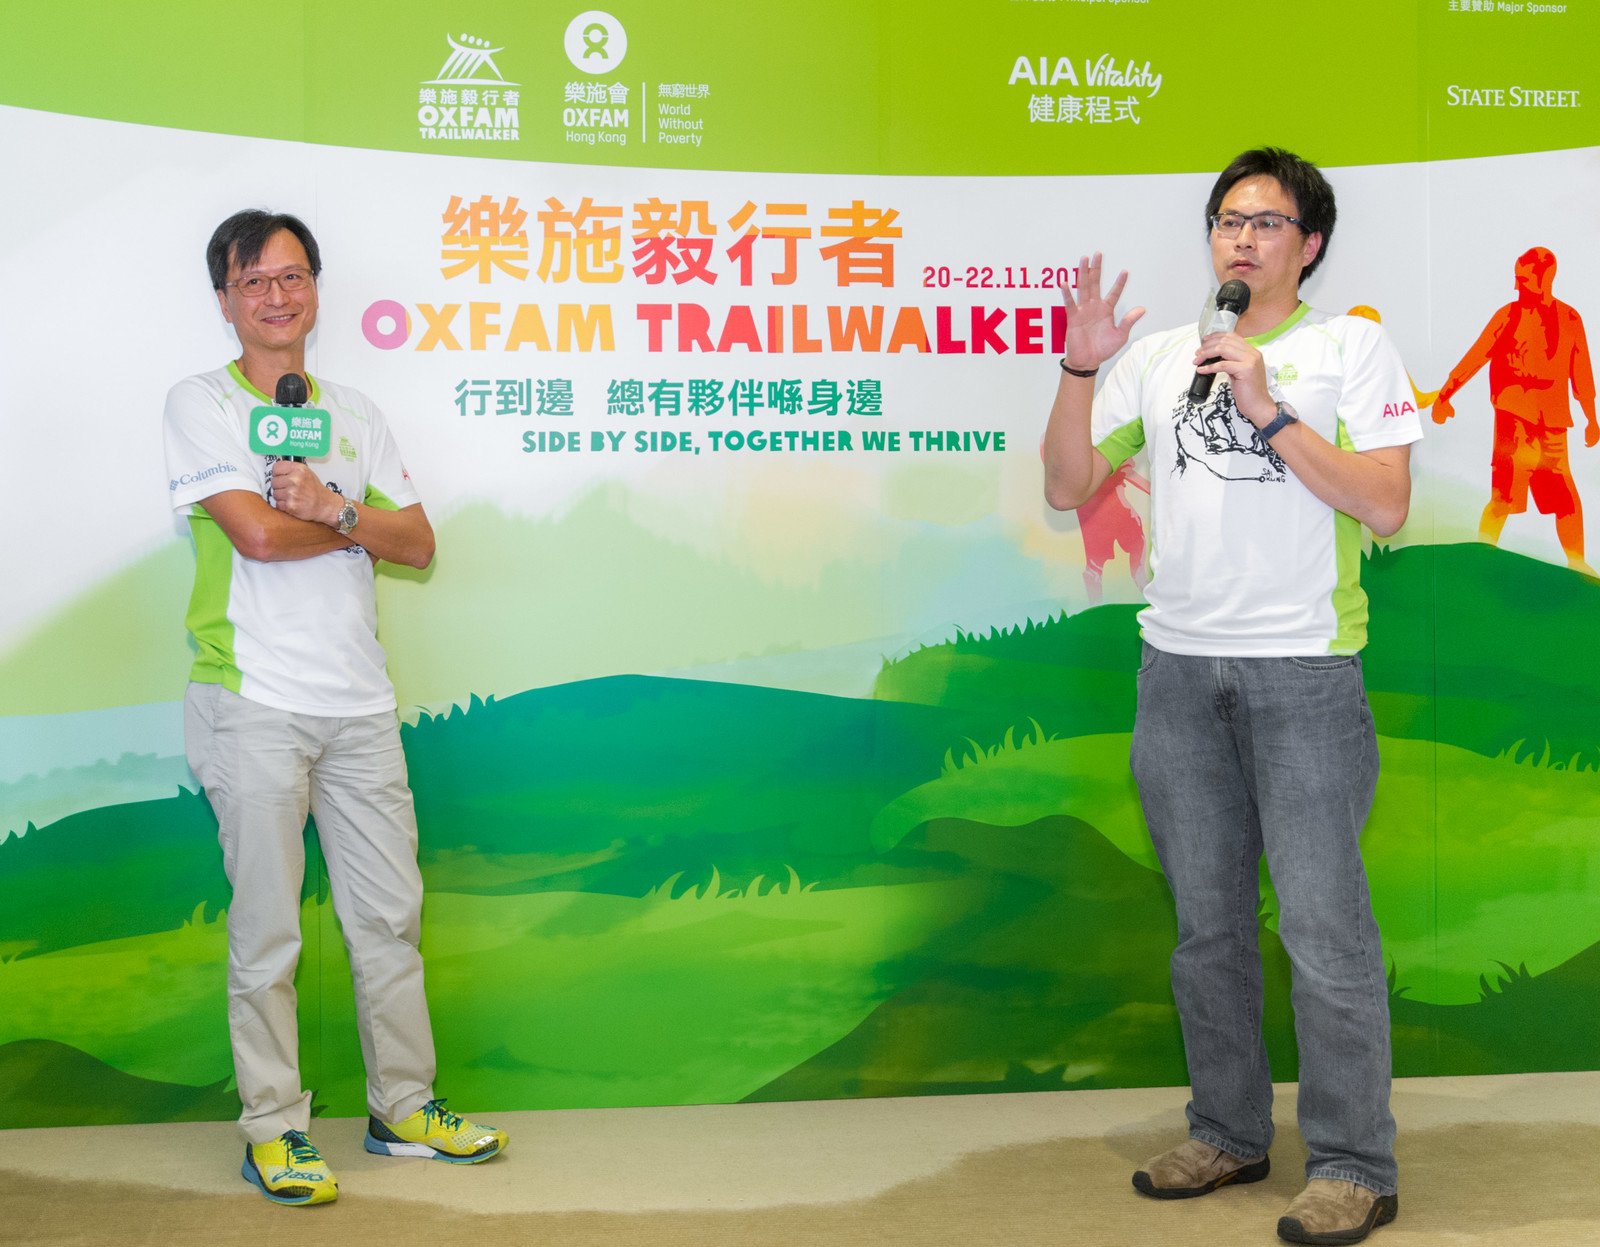 Dr. Kenneth Wu (left), Dr. Chau Chi Wai (right)– representatives of the Kowloon Central Cluster – and their medical team started preparing six months before the Oxfam Trailwalker event.